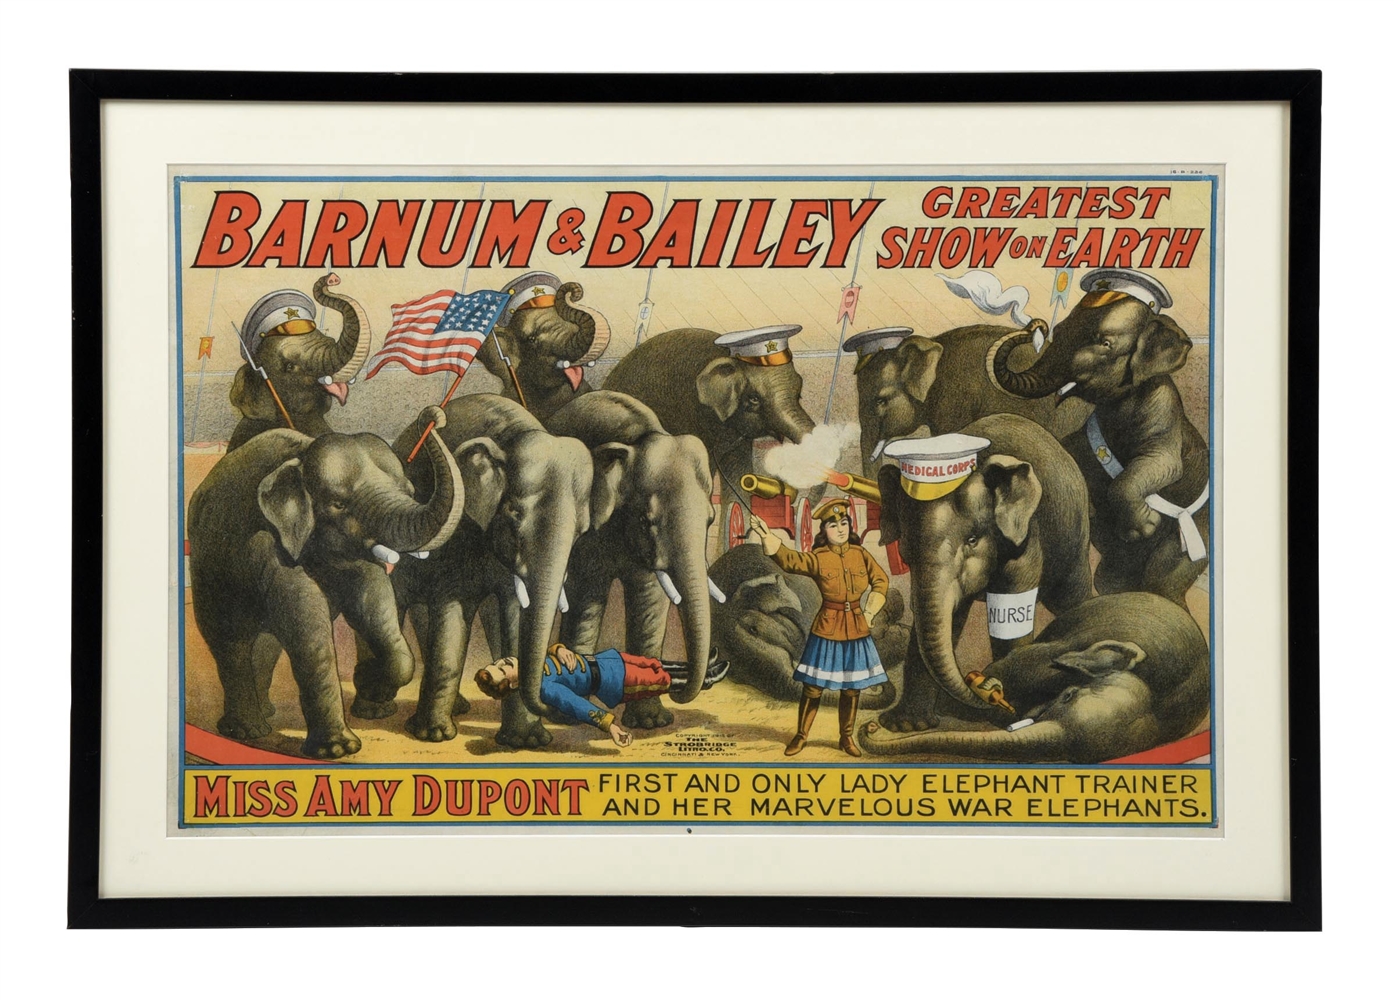 BARNUM AND BAILEY "GREATEST SHOW ON EARTH" PAPER LITHOGRAPH CIRCUS POSTER W/ MISS AMY DUPONT GRAPHIC